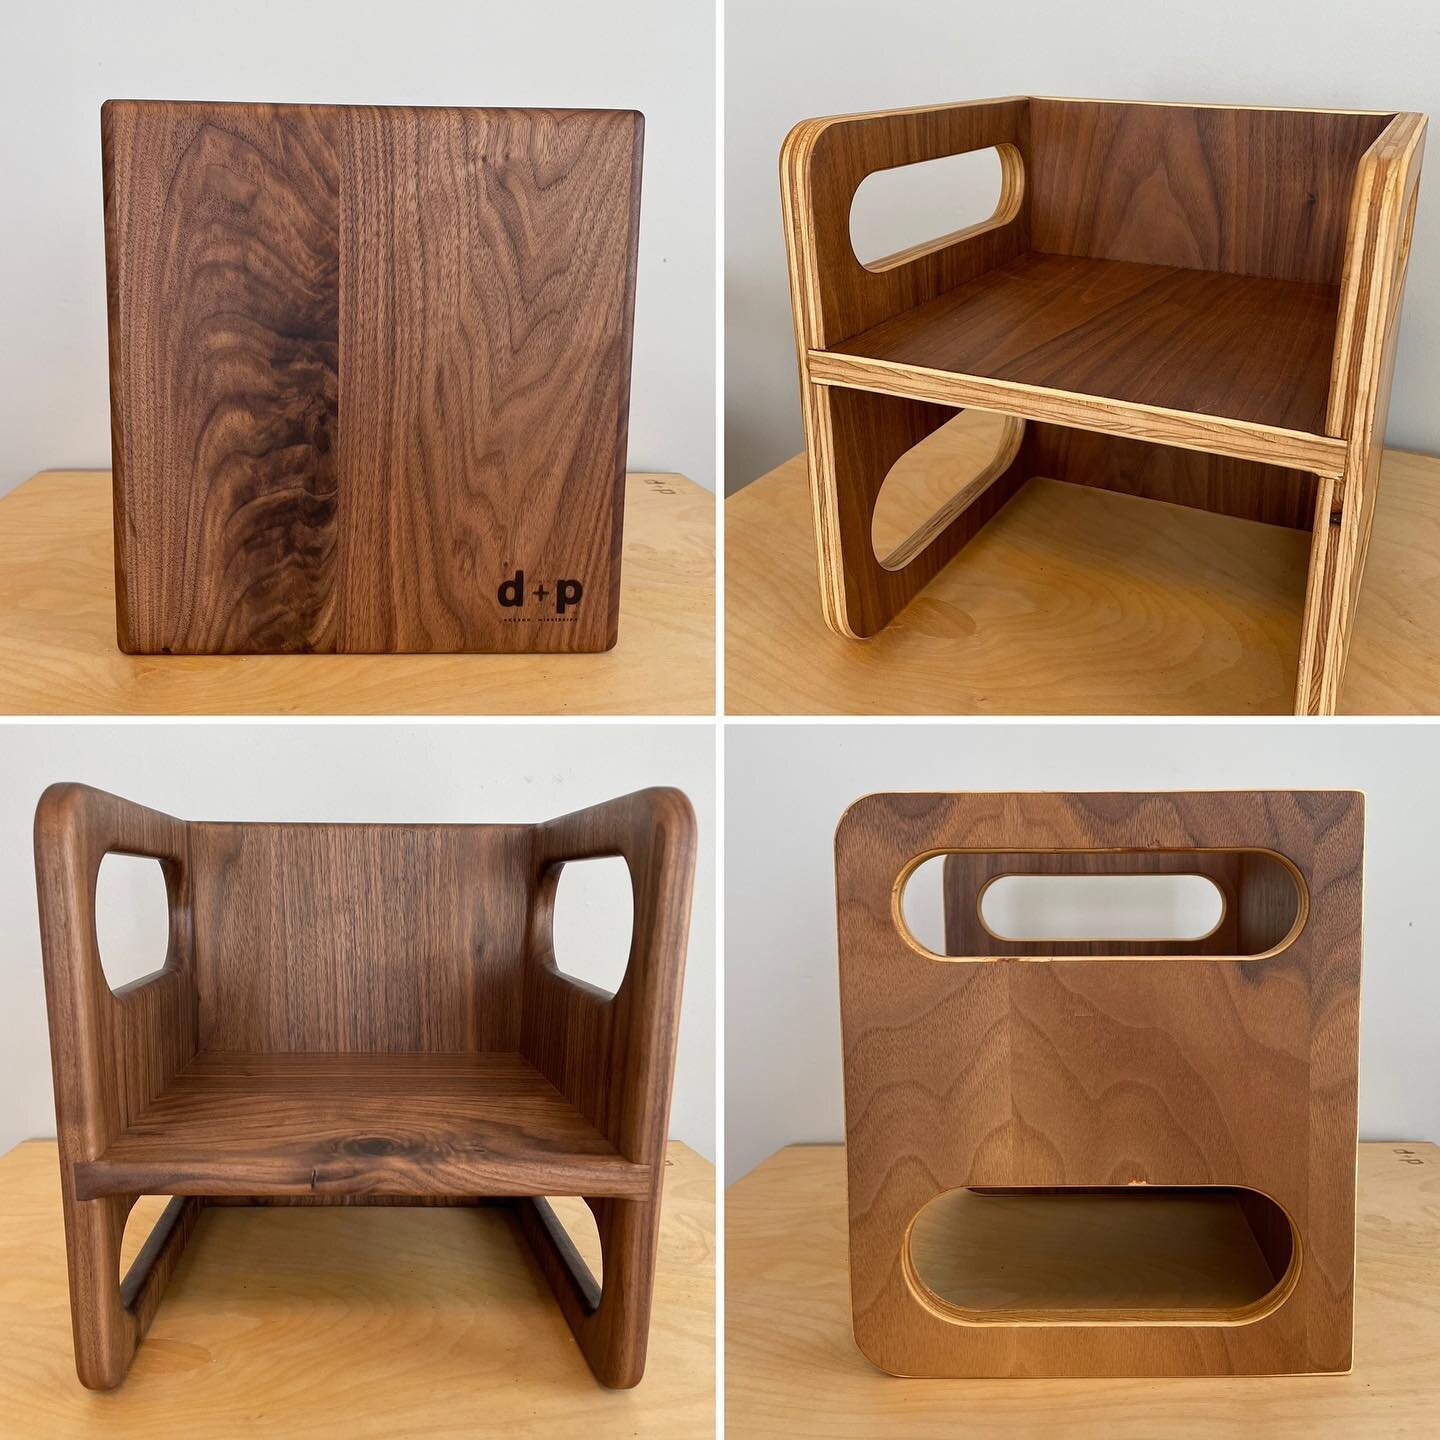 We have 4 ready to ship Ella Adams Montessori style kids chairs available! Two solid walnut, two walnut plywood. Link to our Etsy shop in bio. #dpluspdesignbuild #ellaadamskidschair